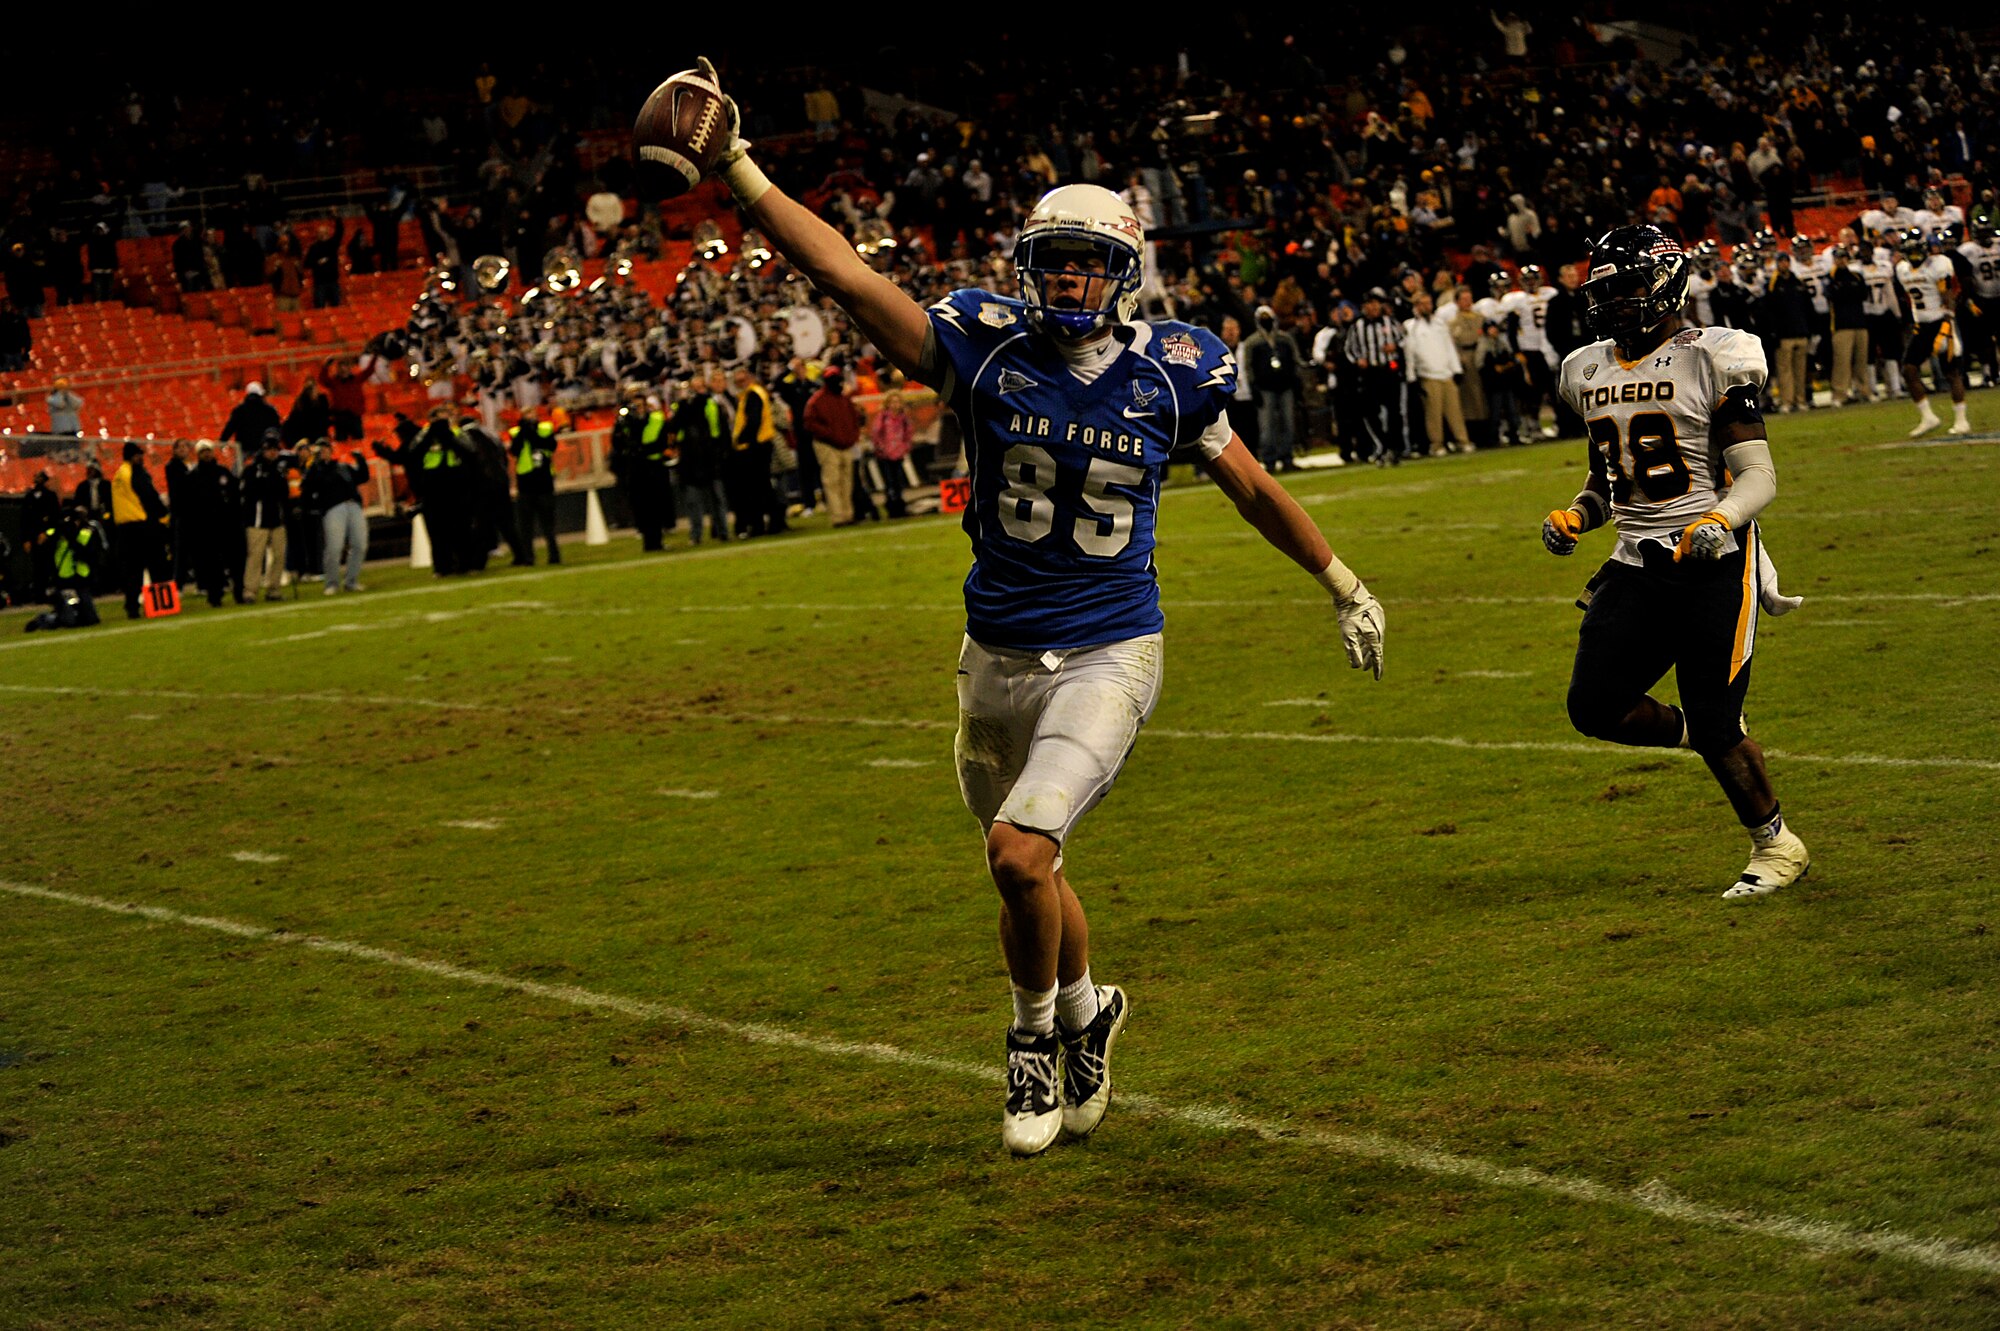 Air Force wide receiver Zack Kauth catches a pass and runs it in for a touch down on December 28, 2011 at RFK stadium against Toledo University for the 2011 Military Bowl. Toledo won the game with a 42-41 victory. (U.S. Air Force Photo by: MSgt Jeremy Lock) (Released)
